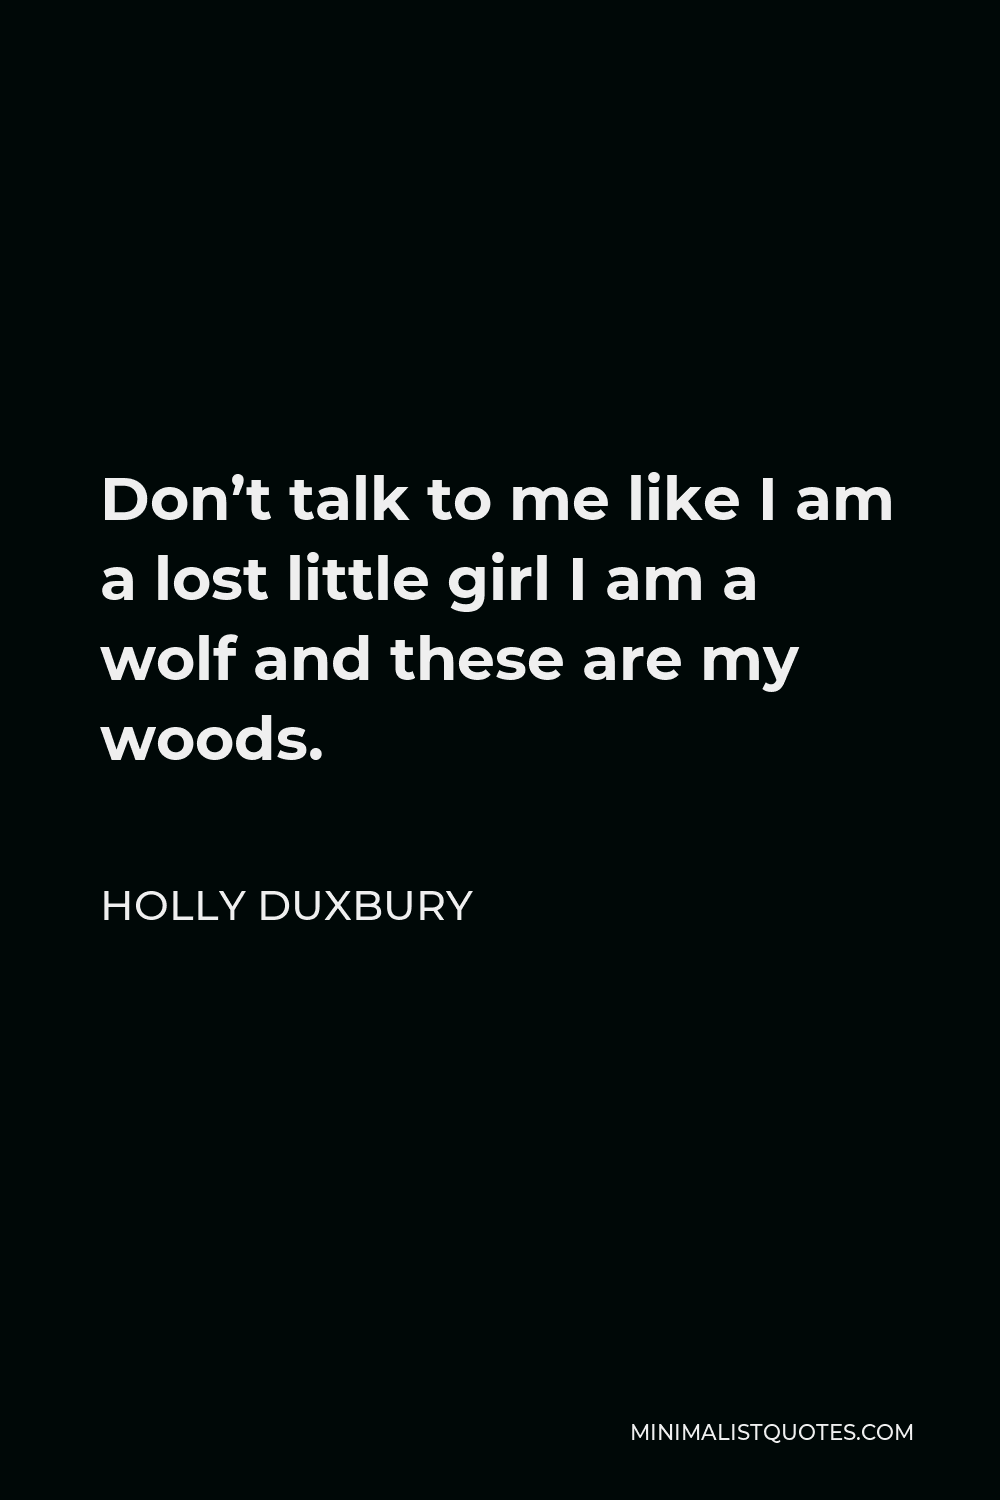 Holly Duxbury Quote - Don’t talk to me like I am a lost little girl I am a wolf and these are my woods.